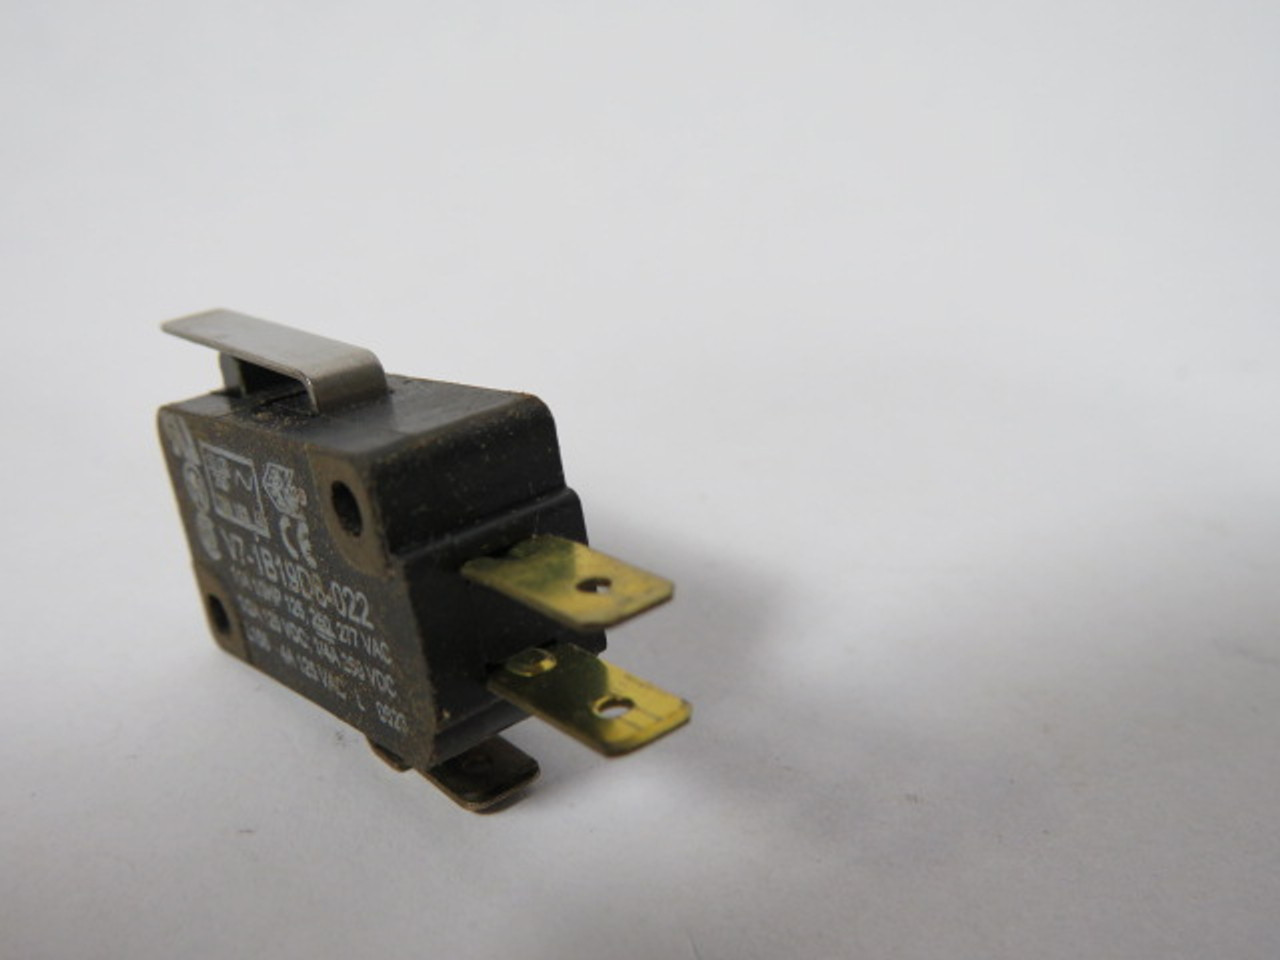 Microswitch V7-1B19D8-022 Lever Switch 11A@1/3HP@125/250/277VAC USED